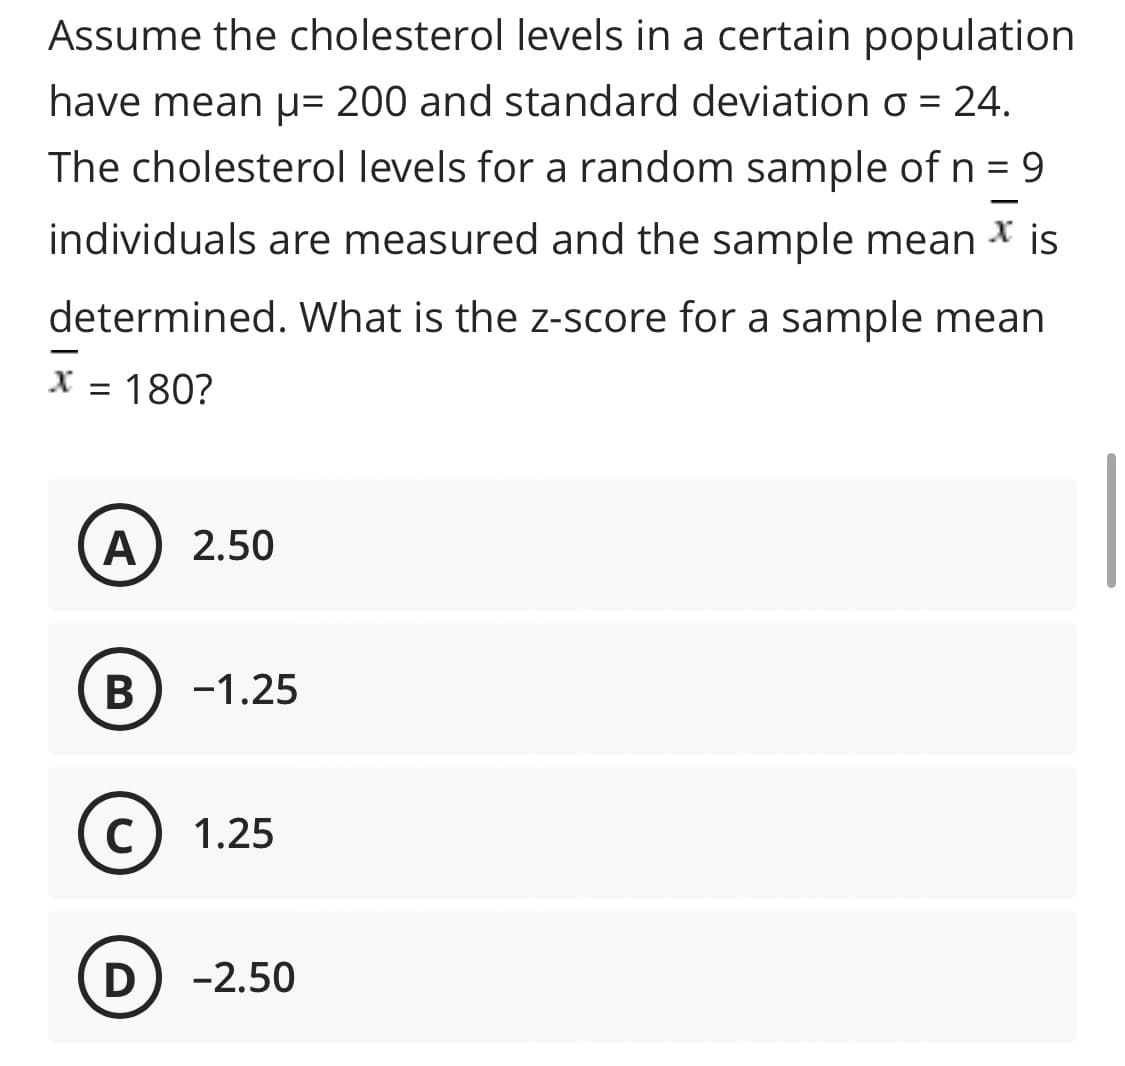 Assume the cholesterol levels in a certain population
have mean µ= 200 and standard deviation o = 24.
The cholesterol levels for a random sample of n = 9
individuals are measured and the sample mean * is
determined. What is the z-score for a sample mean
X = 180?
A
2.50
В
-1.25
C
1.25
-2.50
